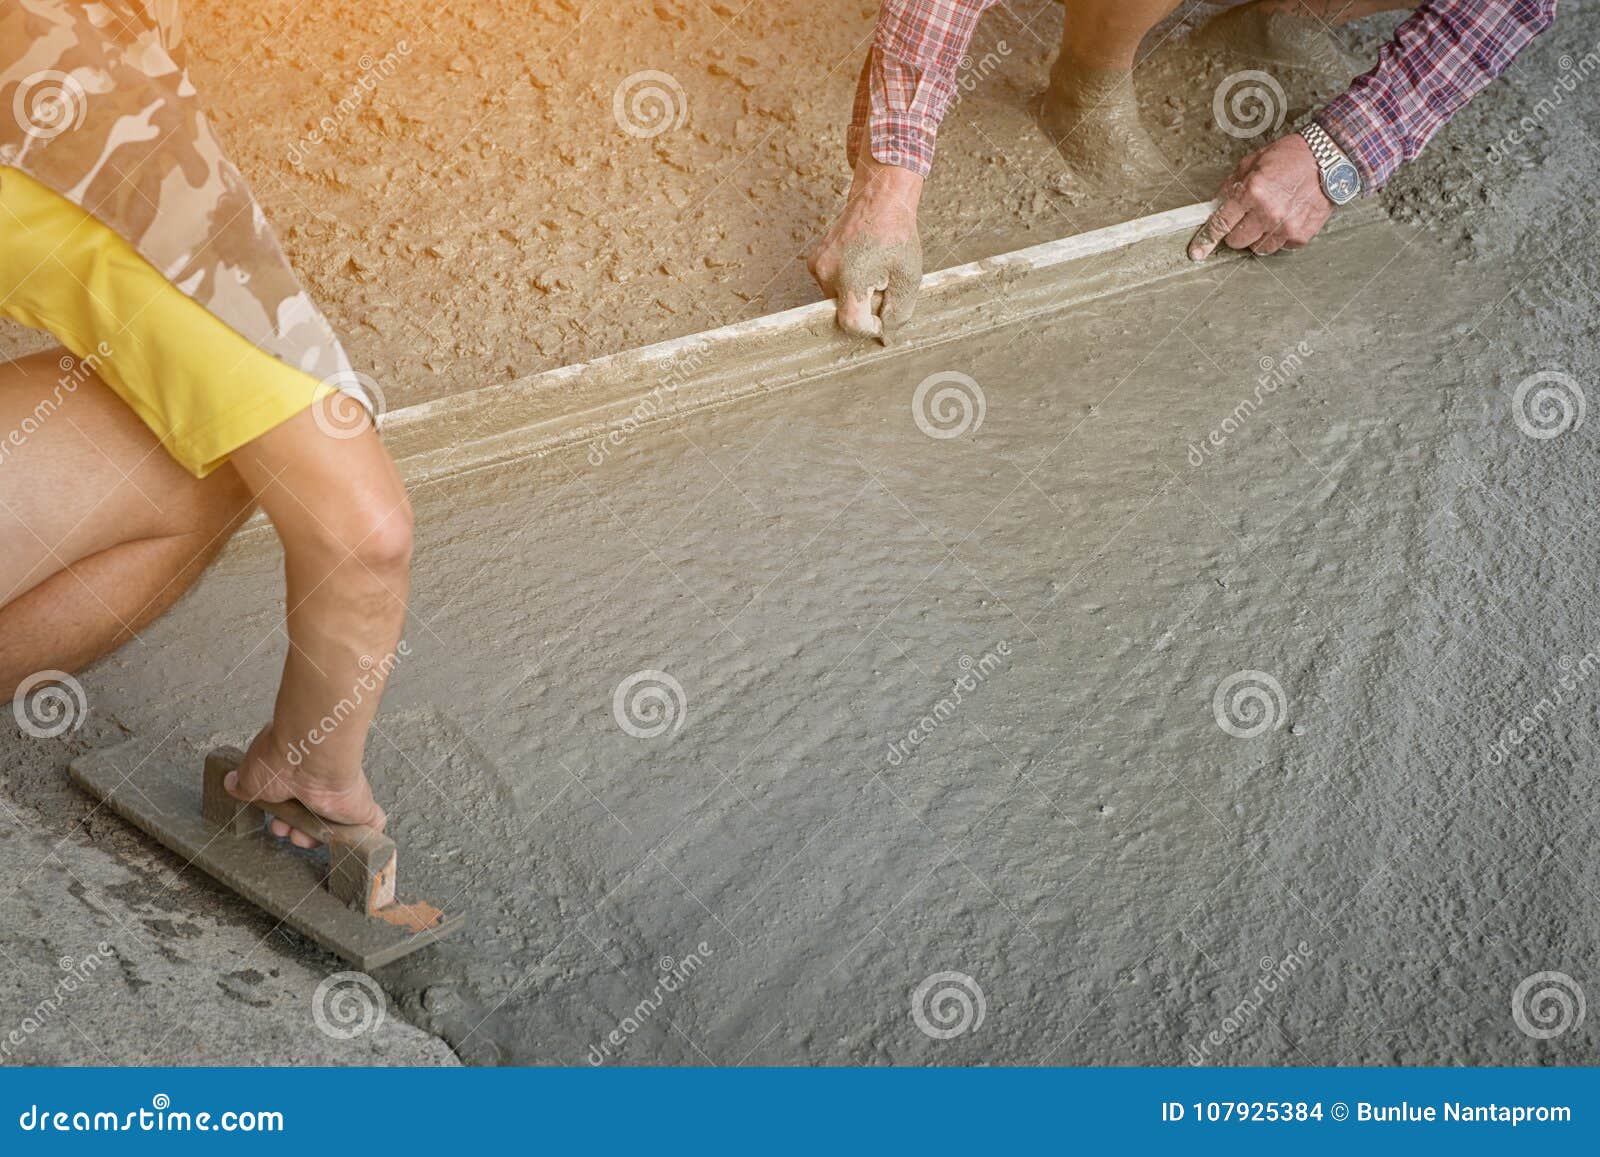 Workers Person Not Wearing Dirt Boots Digging With Hoe Shovel